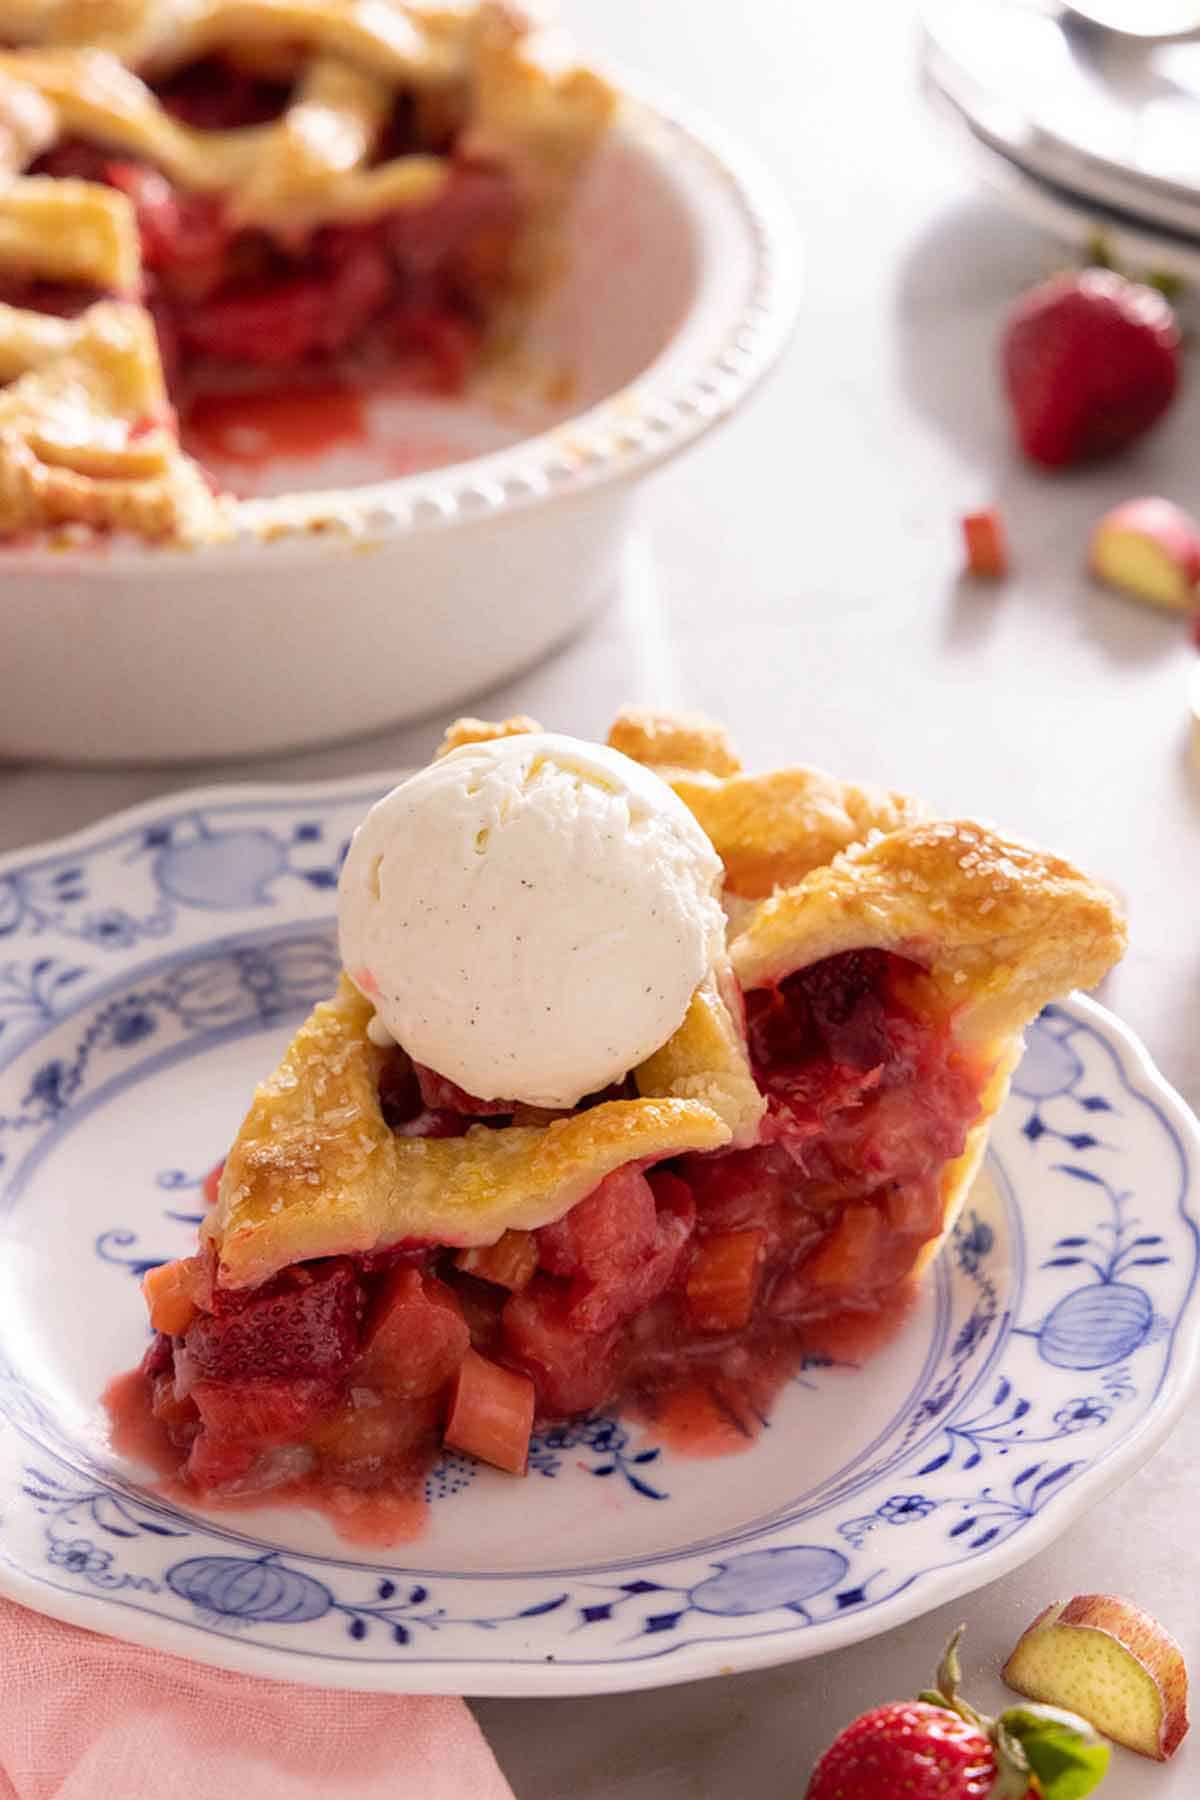 A plate with a slice of strawberry rhubarb pie with a scoop of vanilla ice cream on top.